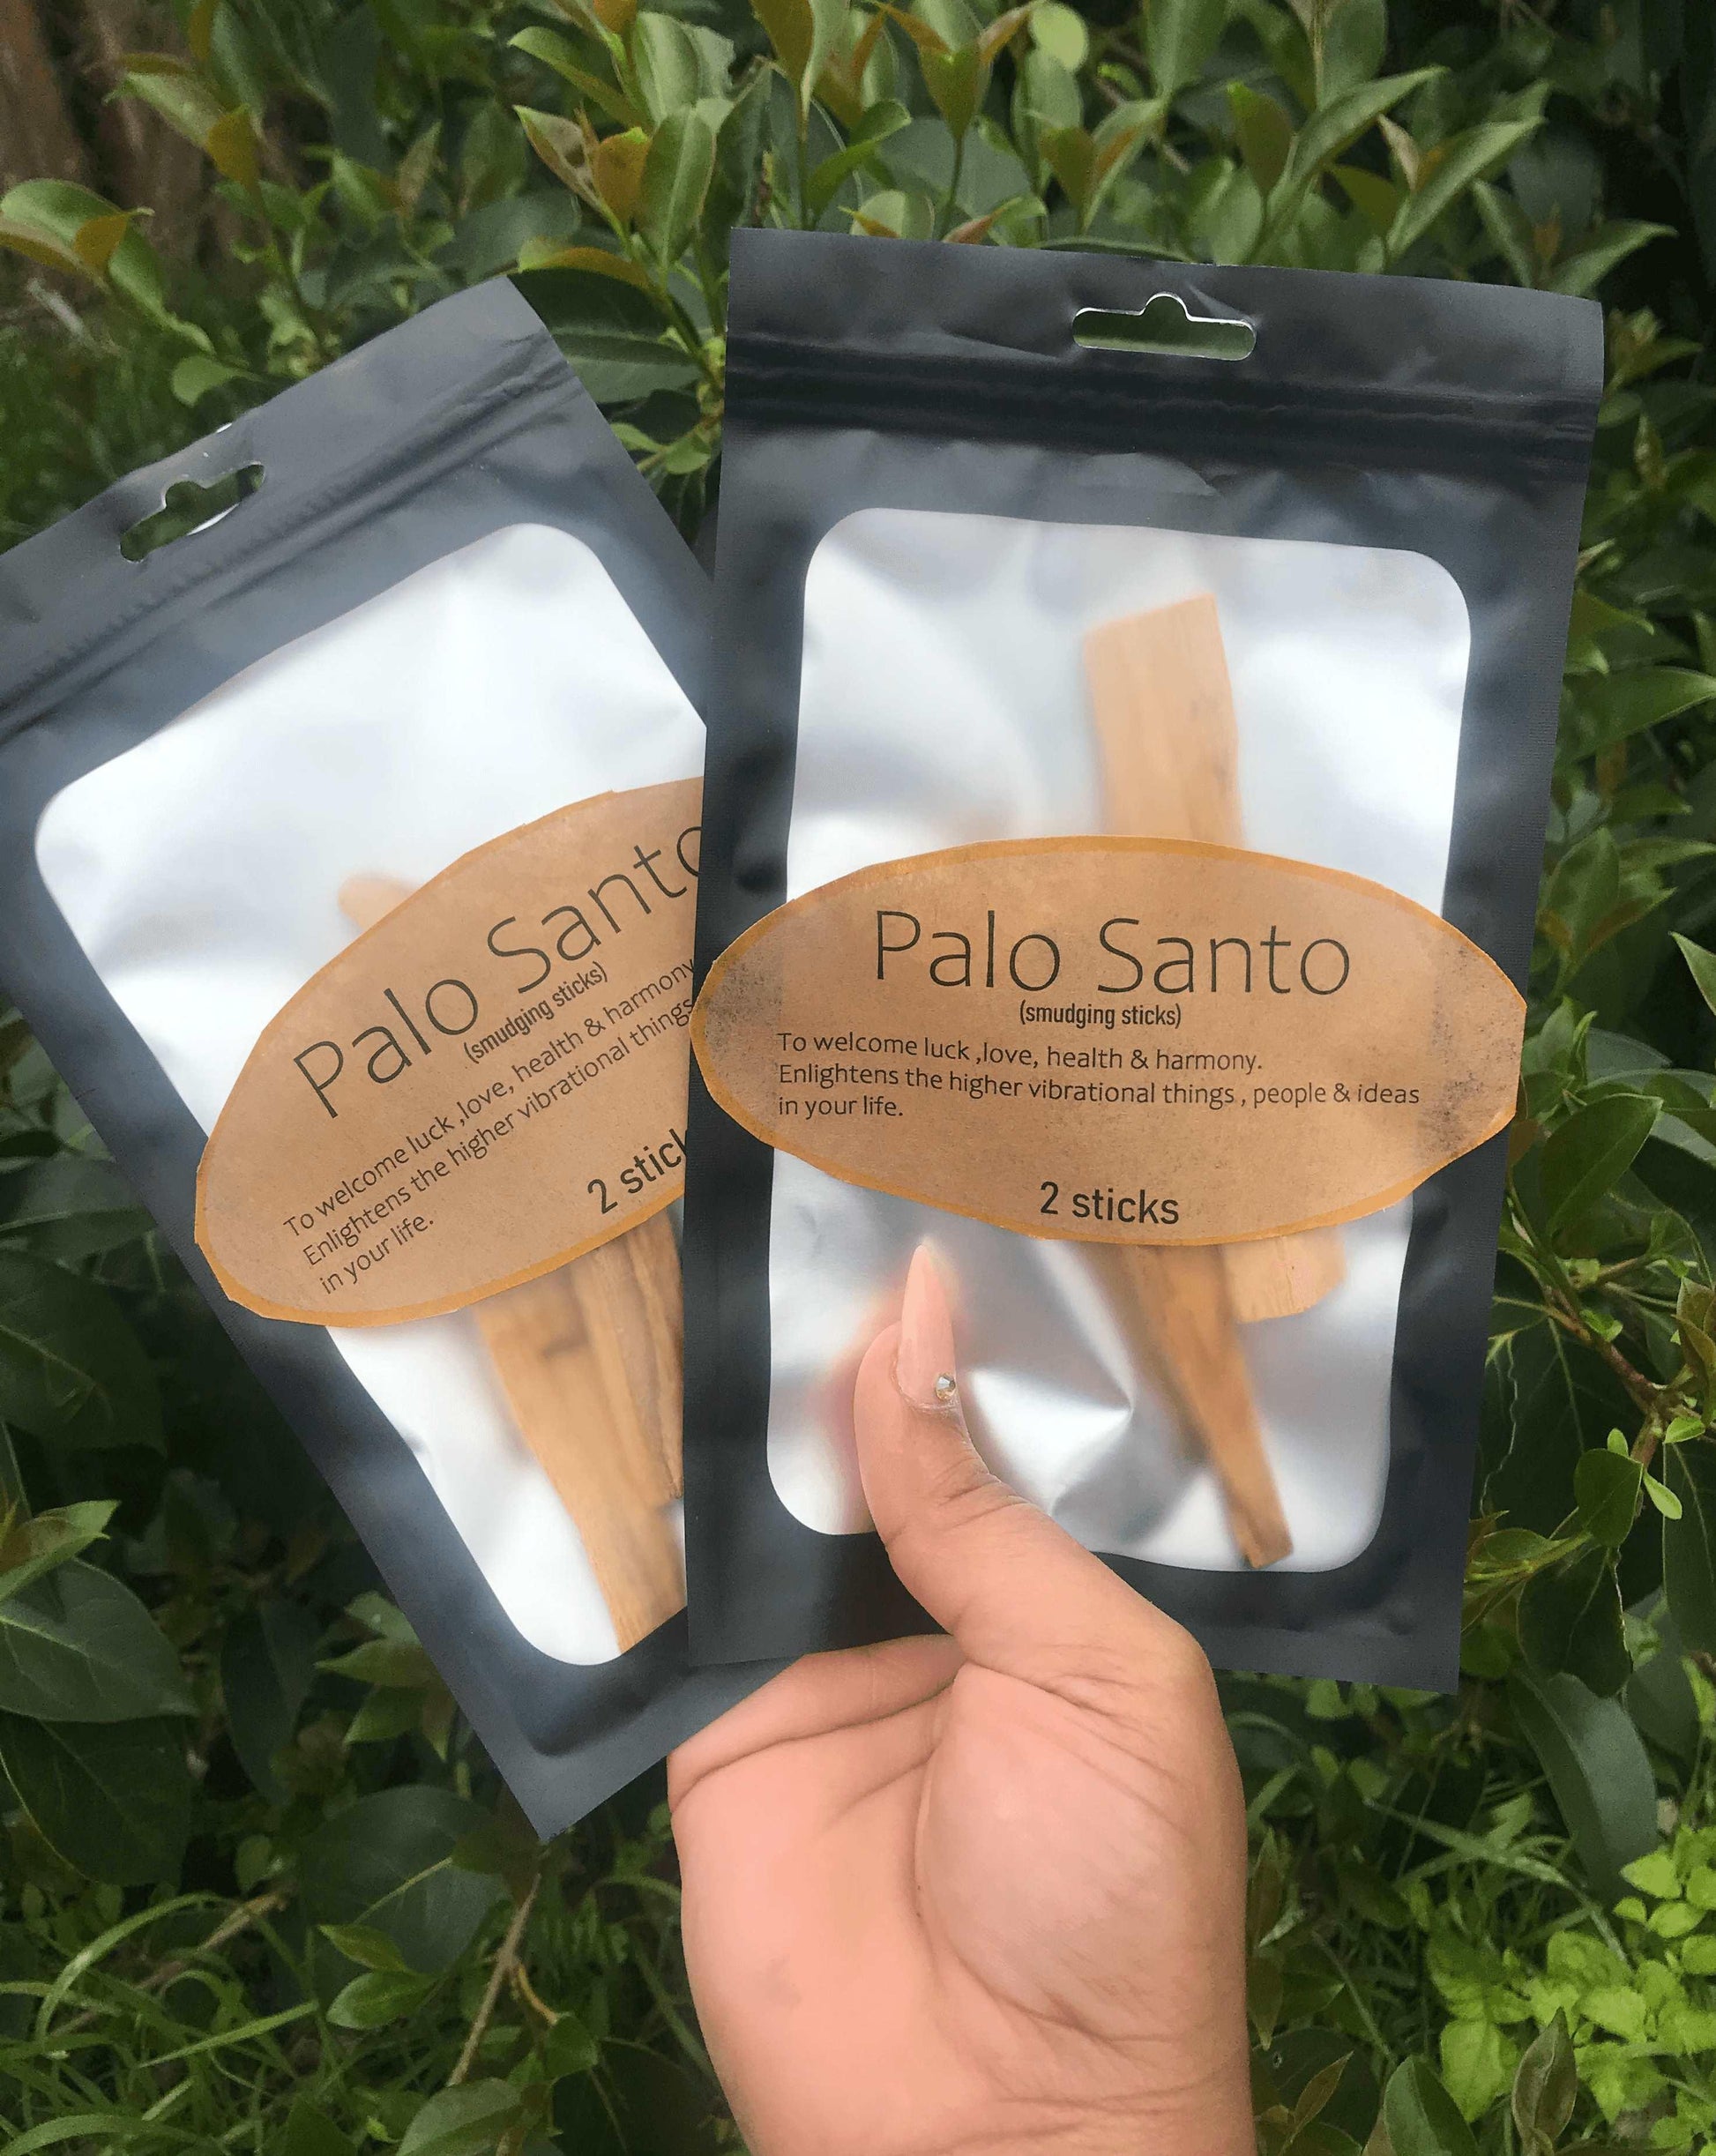 Palo Santo (Holy Wood) by Sage N Thangs